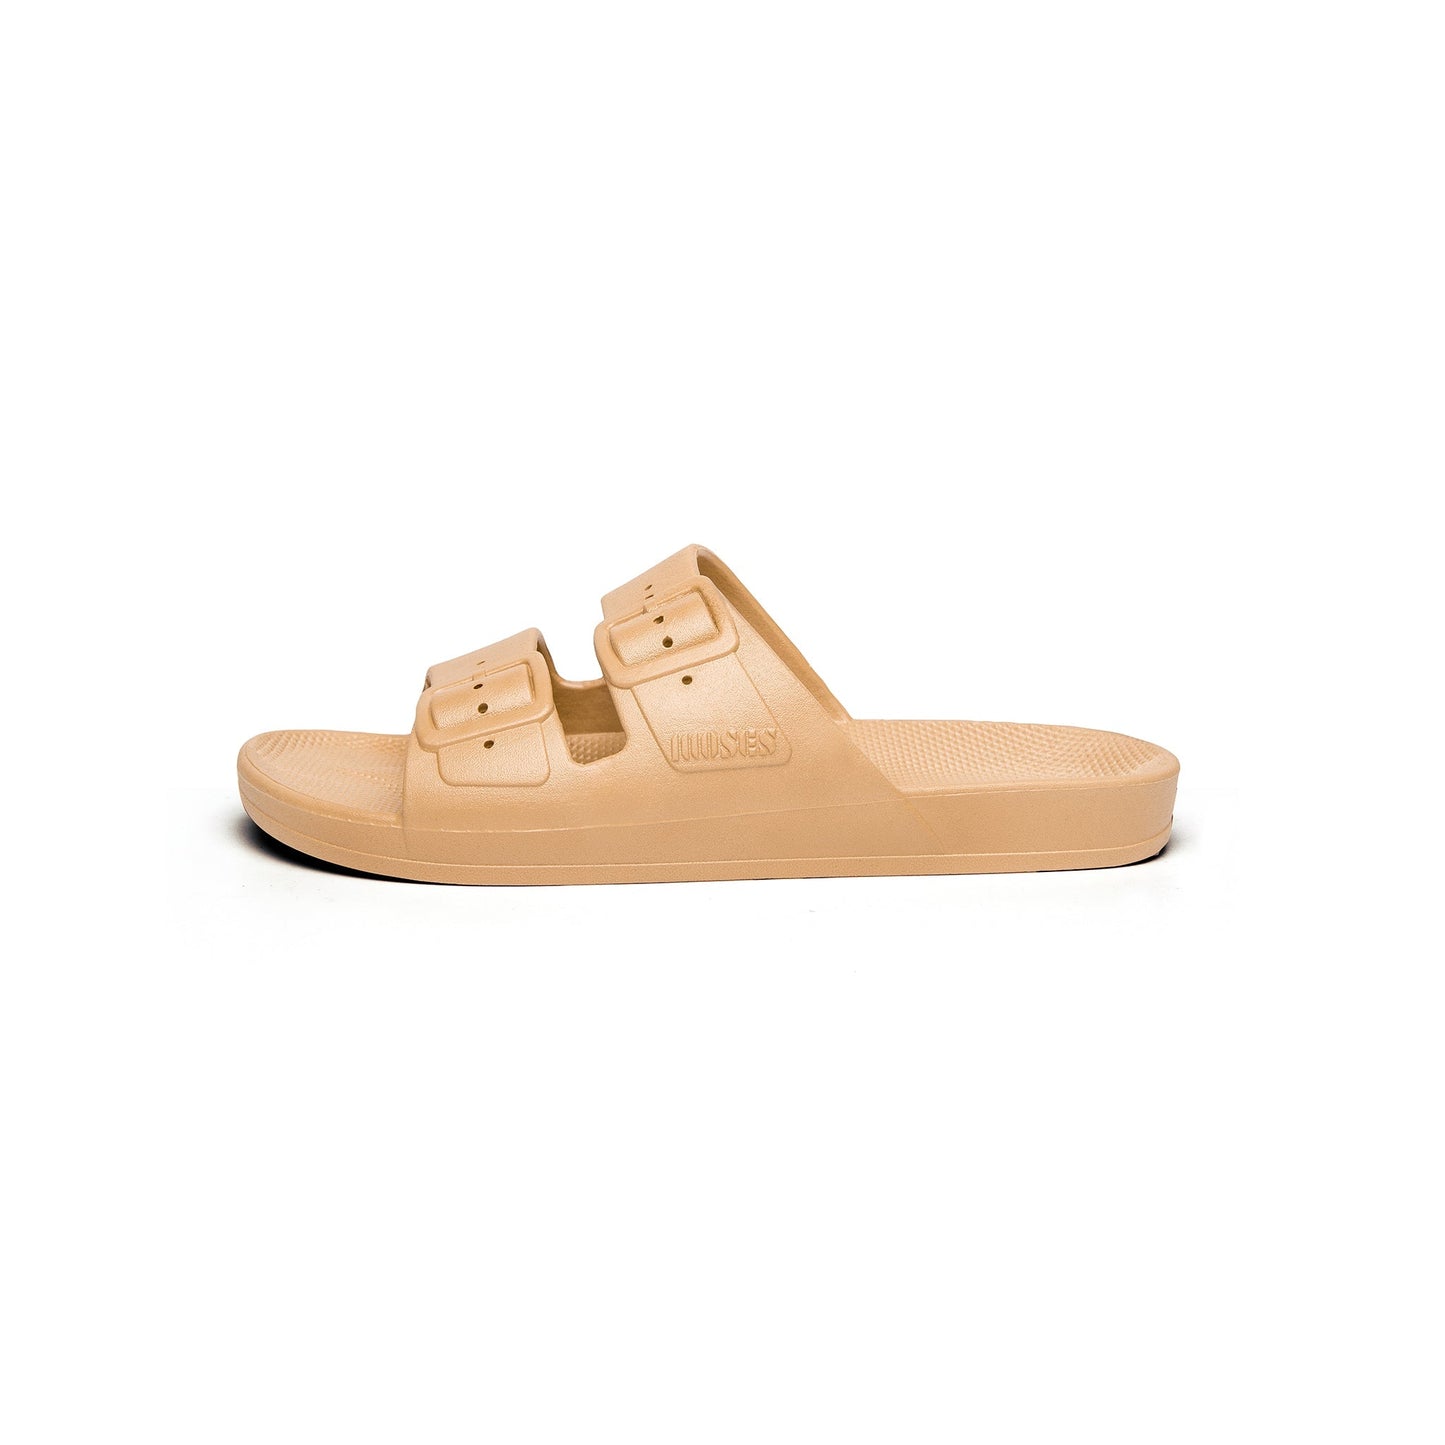 Slippers Freedom Moses Camel Sandals Neo Family 